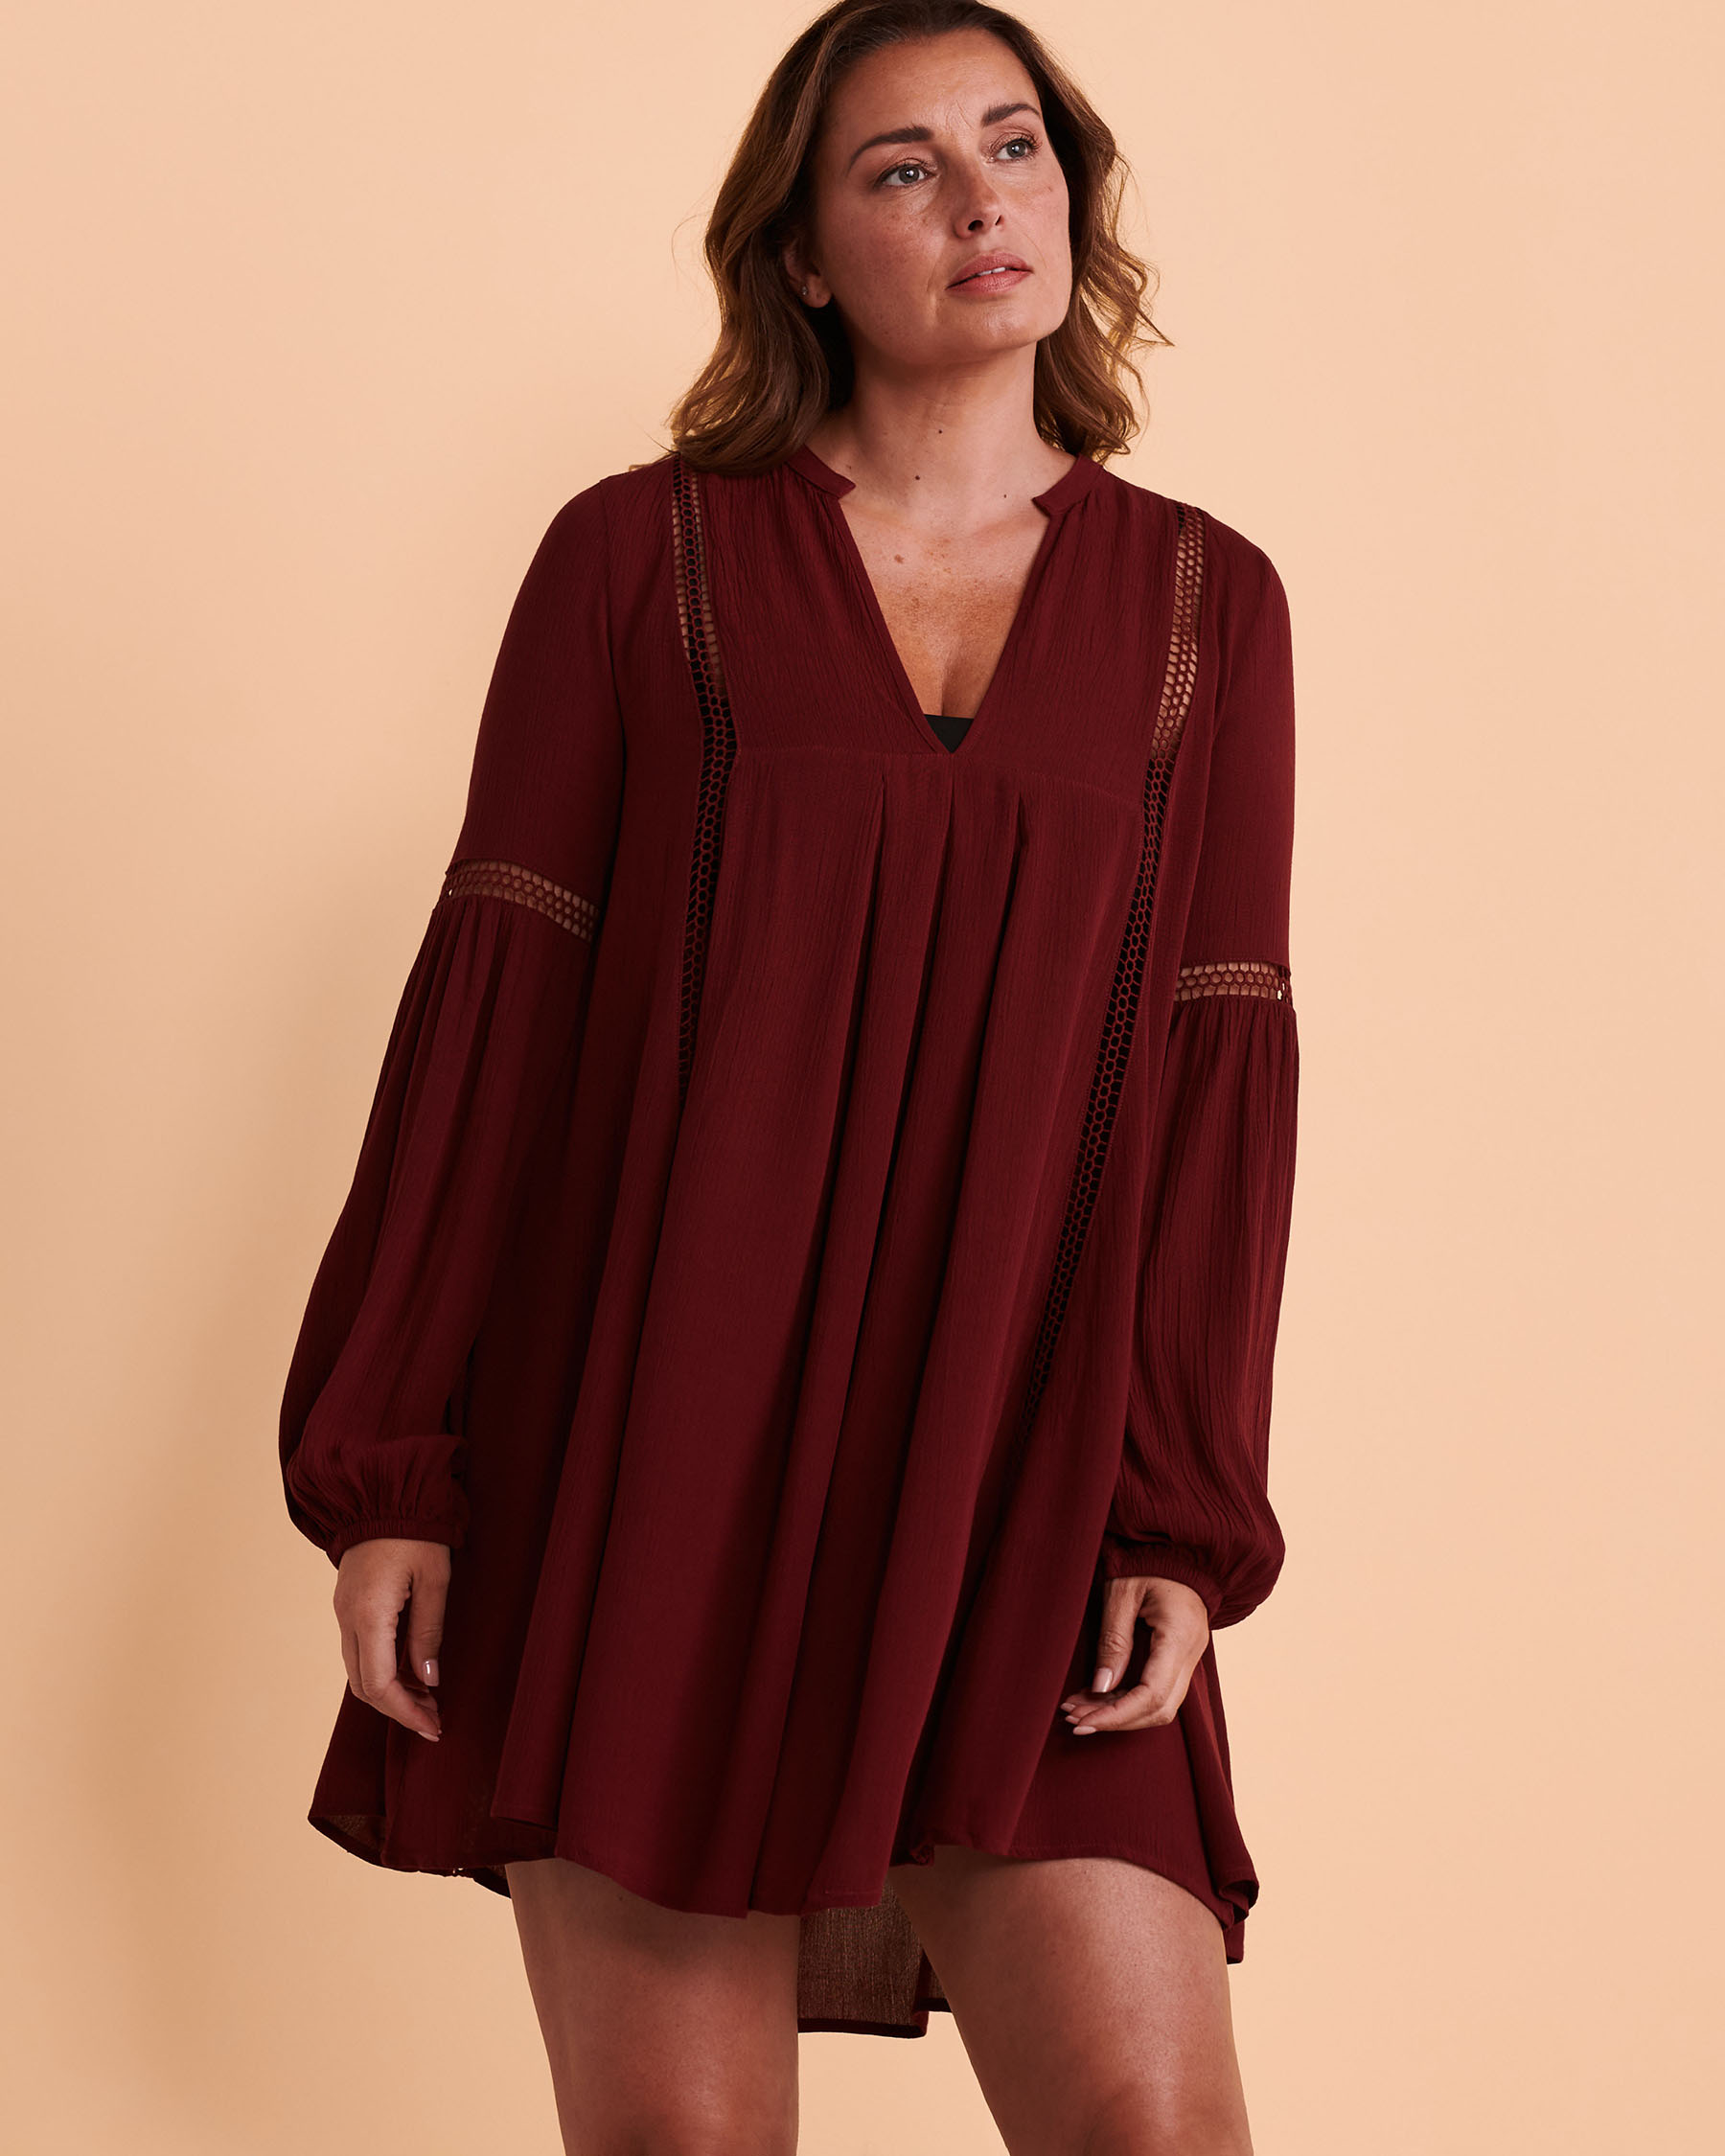 TURQUOISE COUTURE Long Sleeve Dress with Crochet Detail Red wine 02300073 - View1